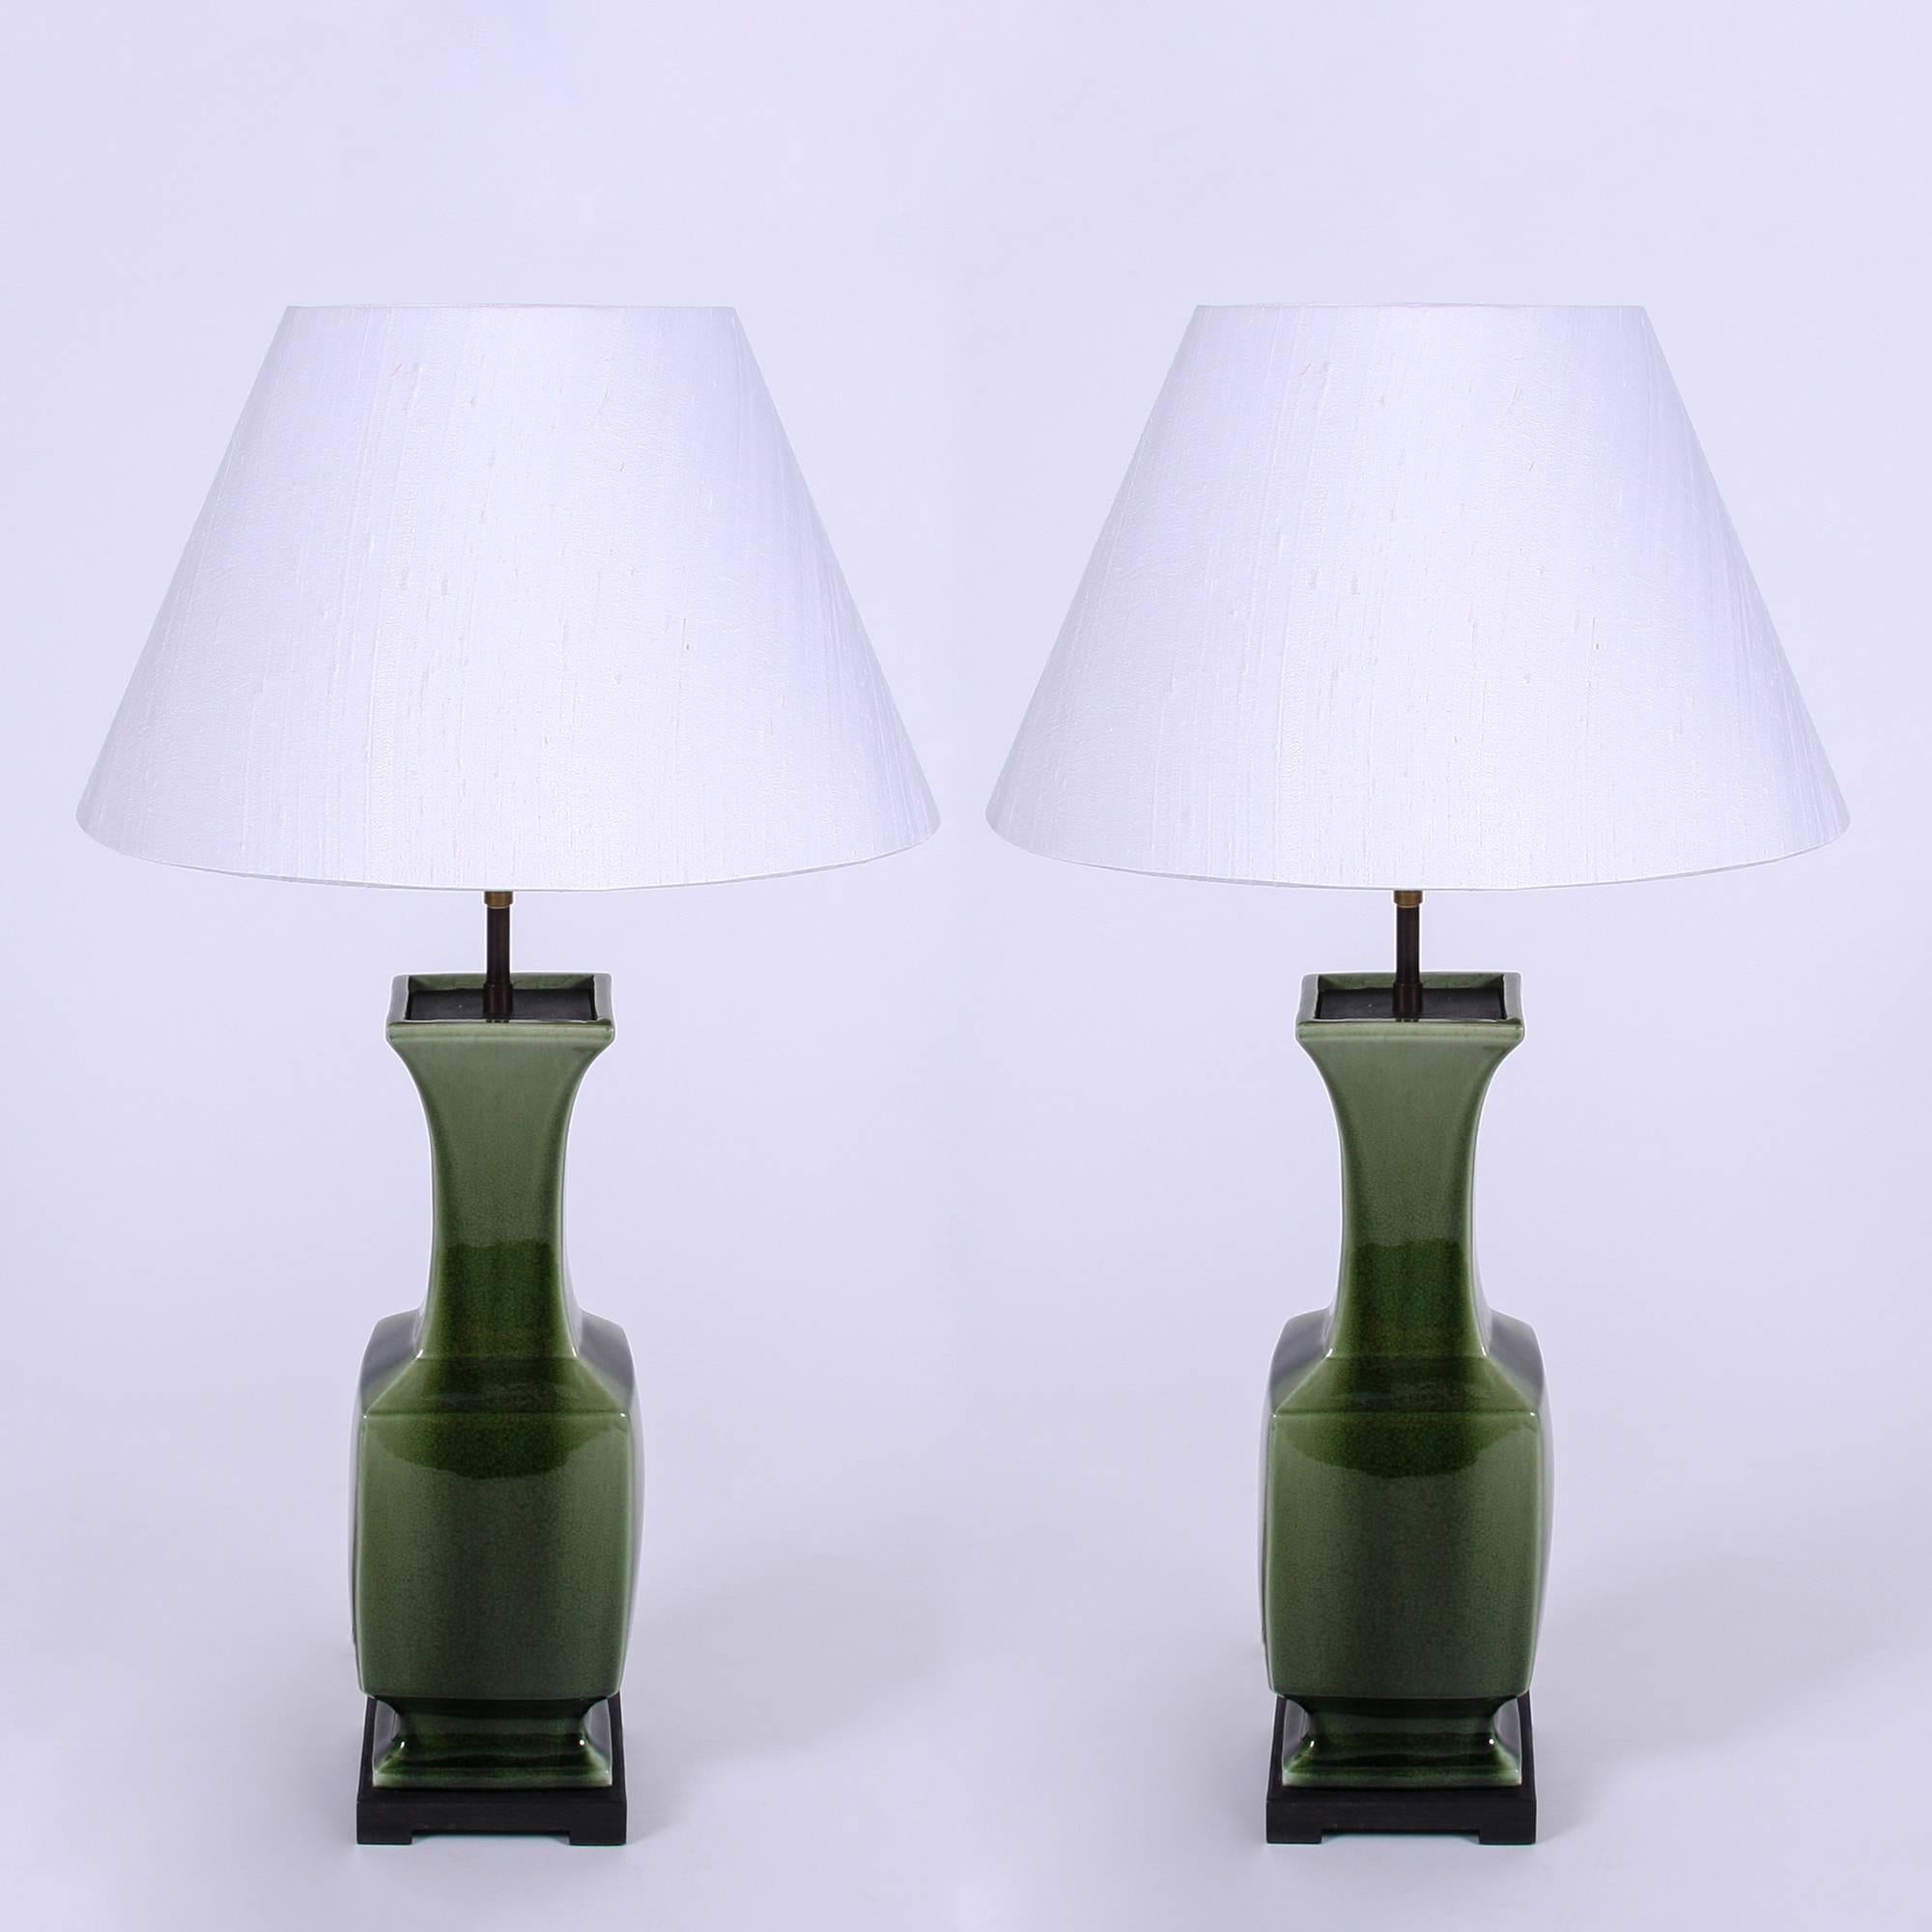 Portuguese c.1960

Pair of green ceramic lamps with ebonised wood base and stunning two tone glaze finish. Handmade silk lampshapes. Rewired and PAT tested. 